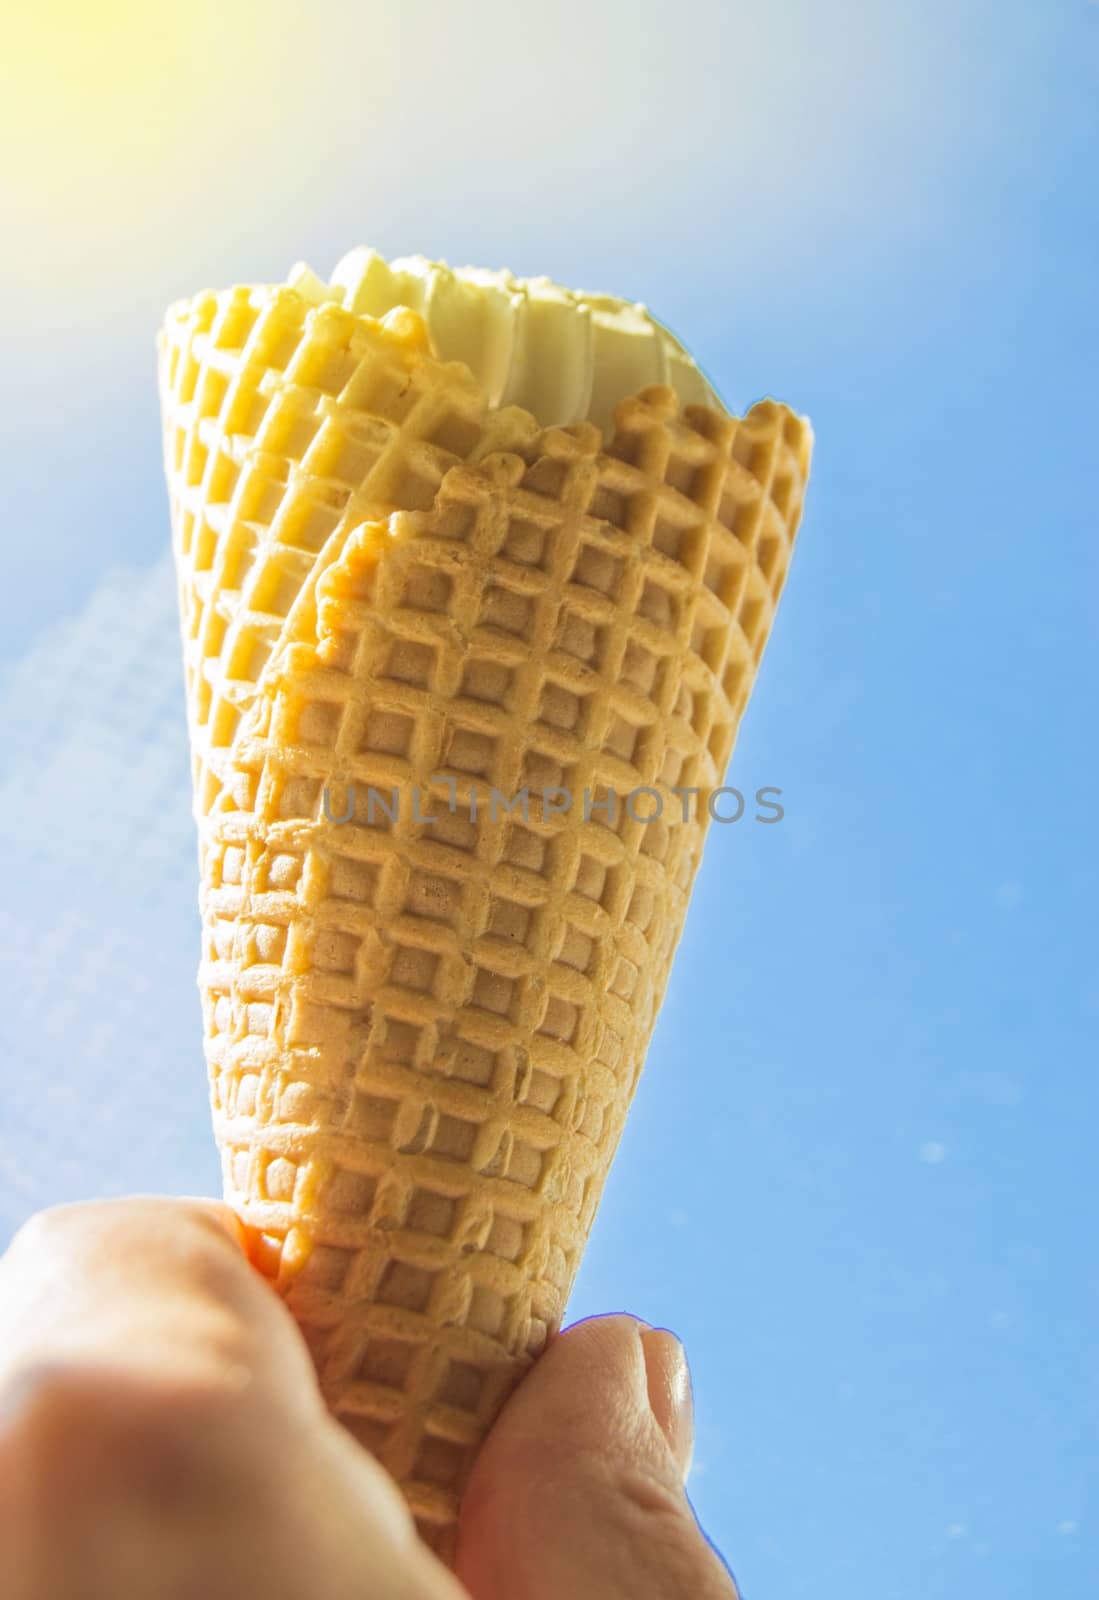 Summer, party, hand holding a vanilla ice cream cone against the blue sky and sunlight.